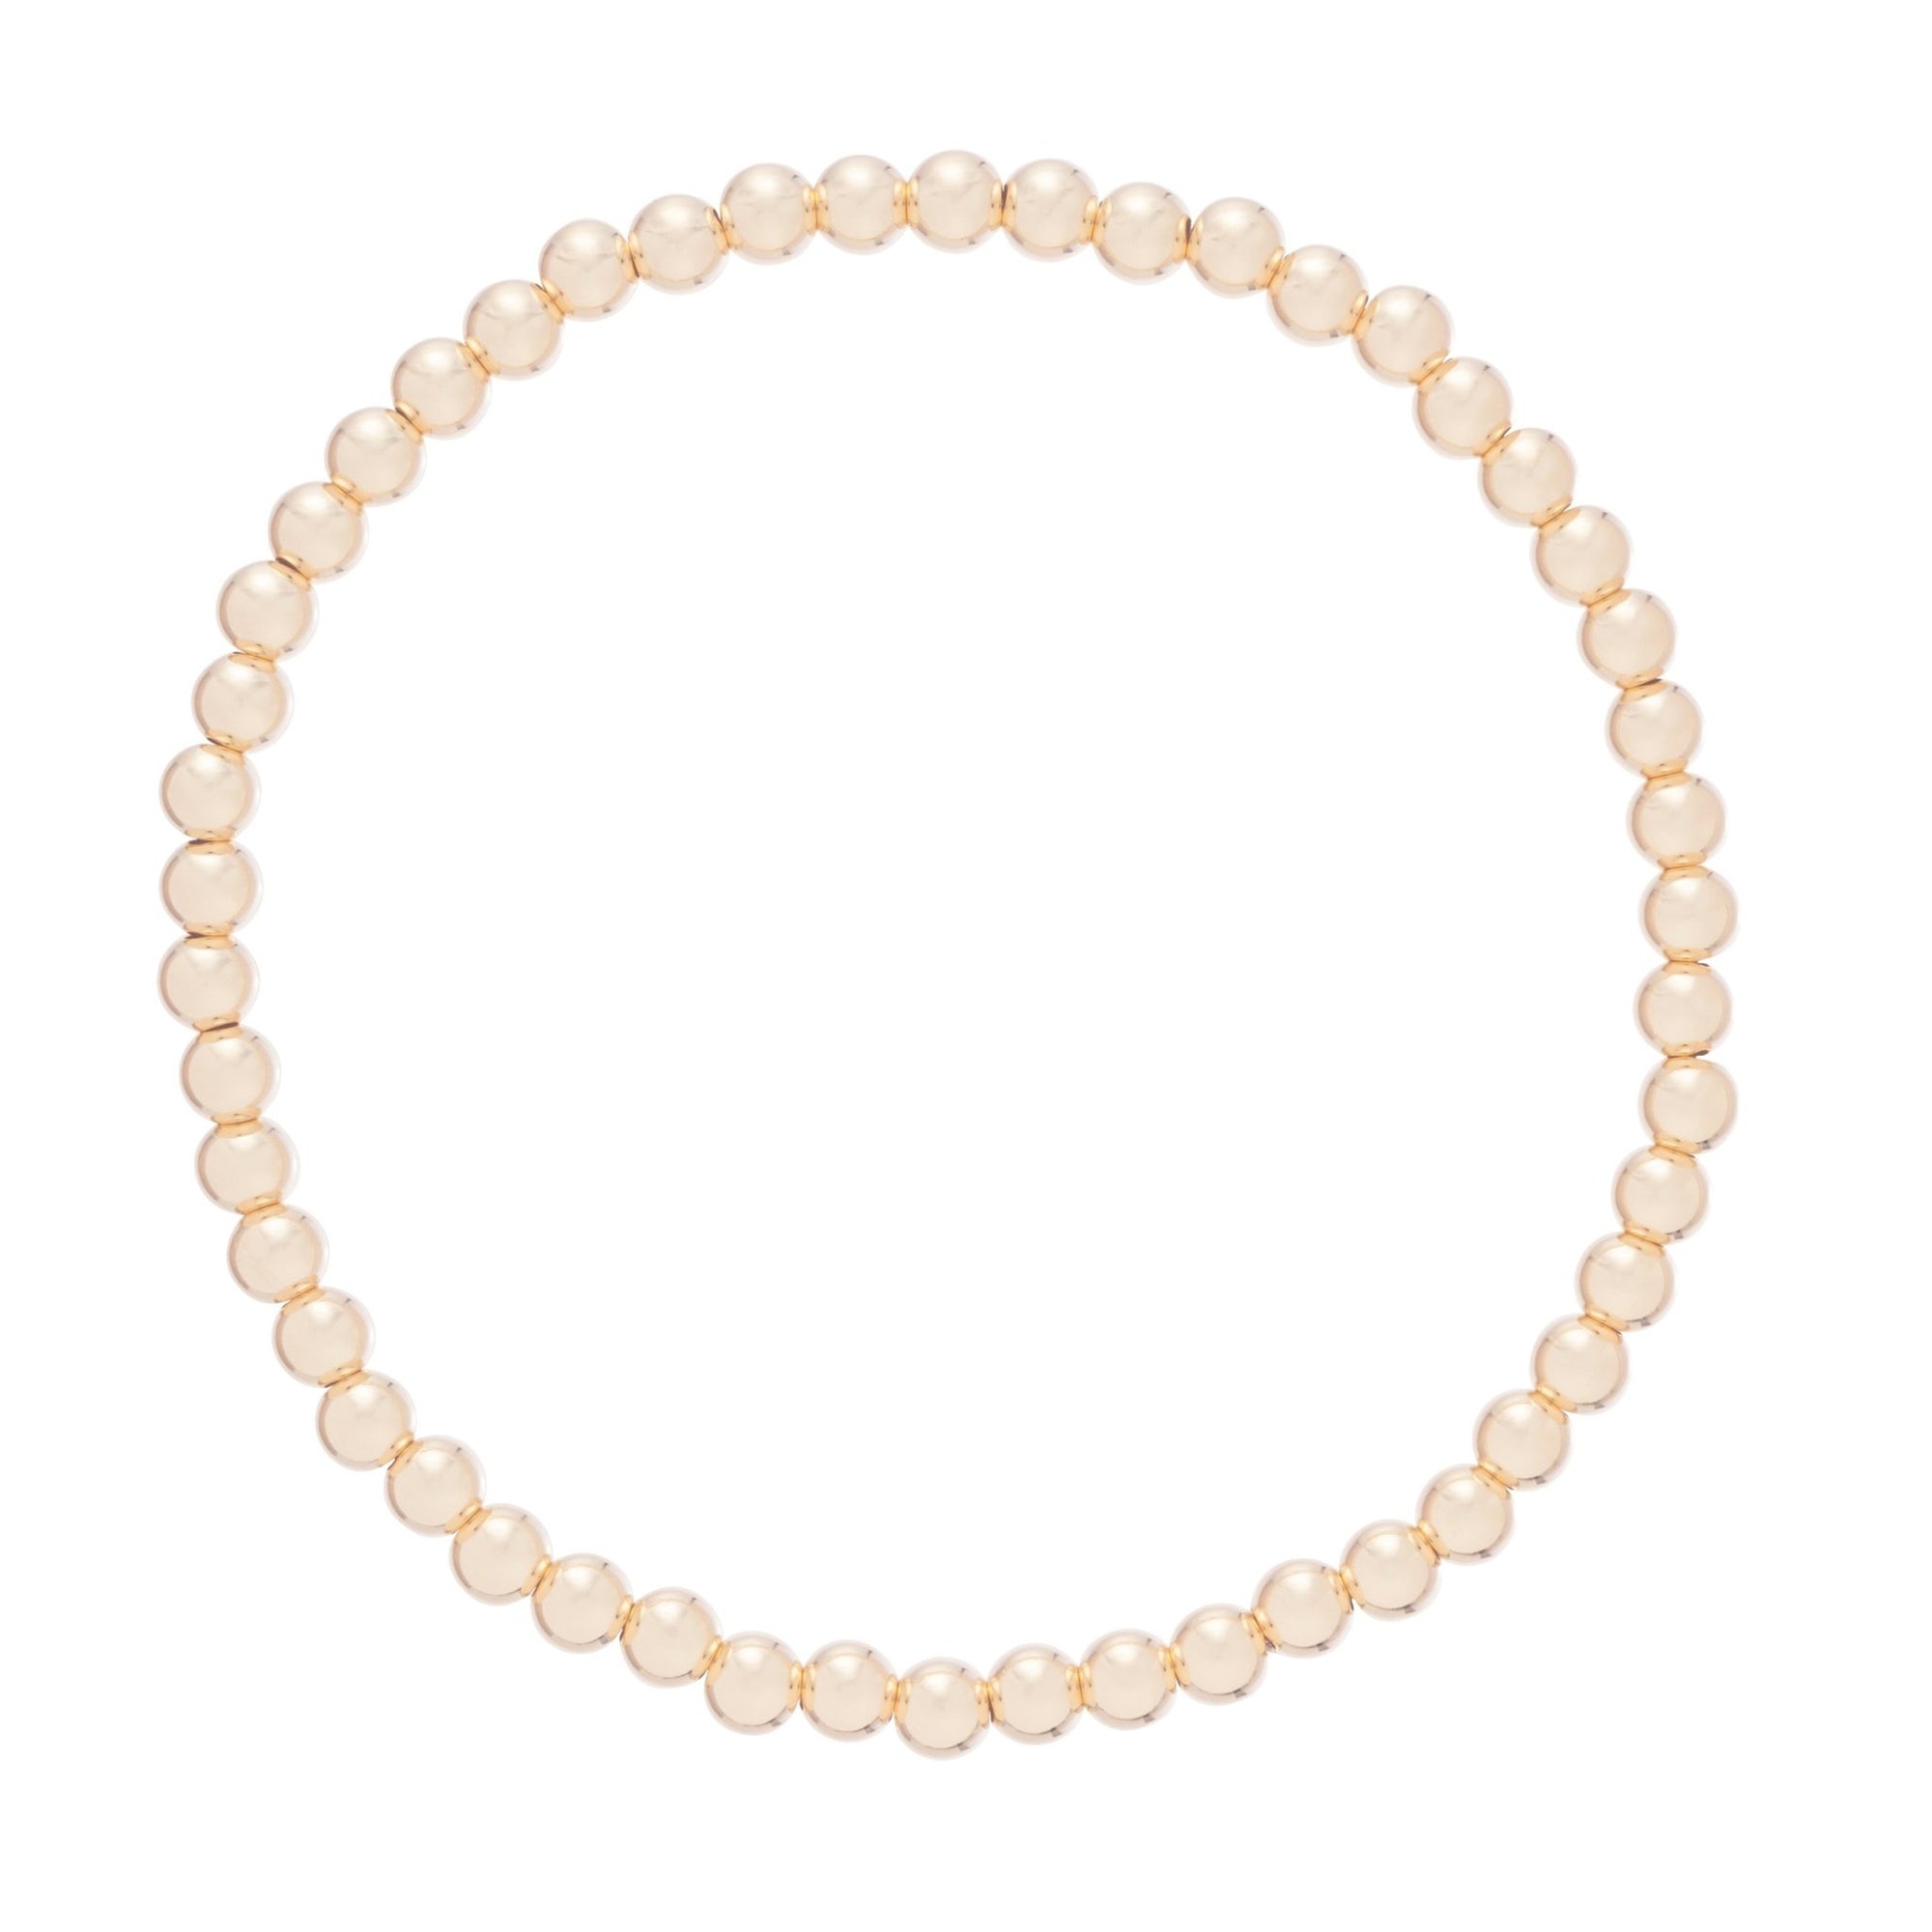 CLASSIC GOLD 4MM BEAD BRACELET - Molly's! A Chic and Unique Boutique 